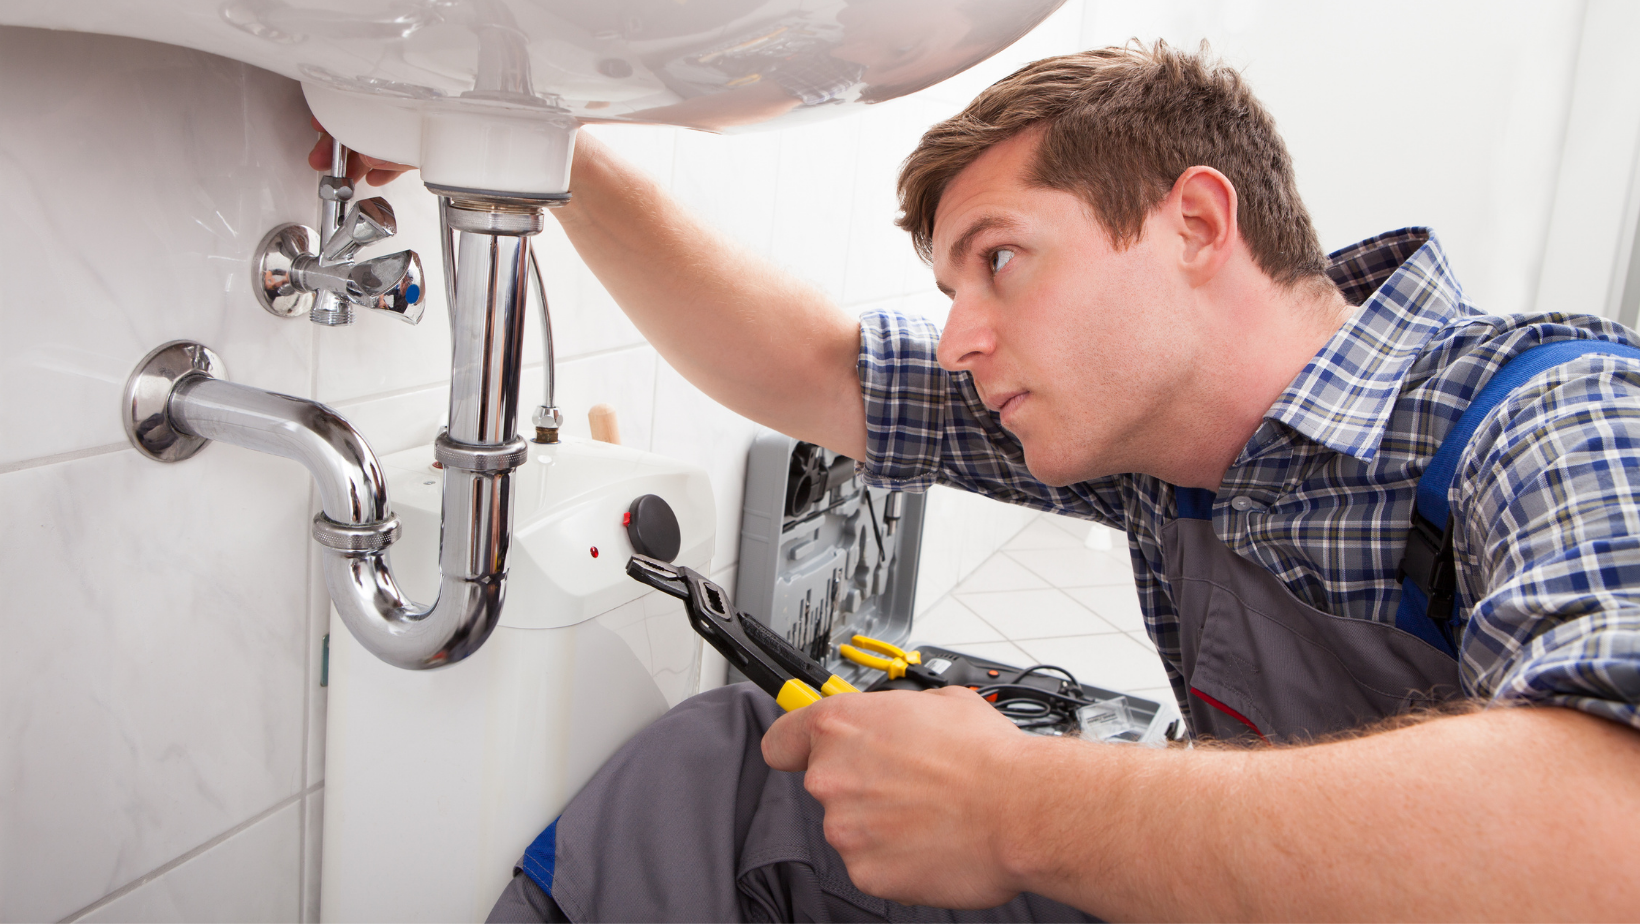 The importance of getting reviews for your plumbing business